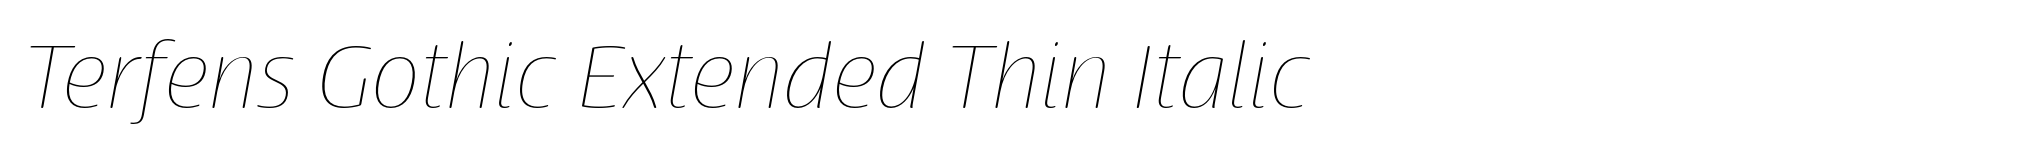 Terfens Gothic Extended Thin Italic image